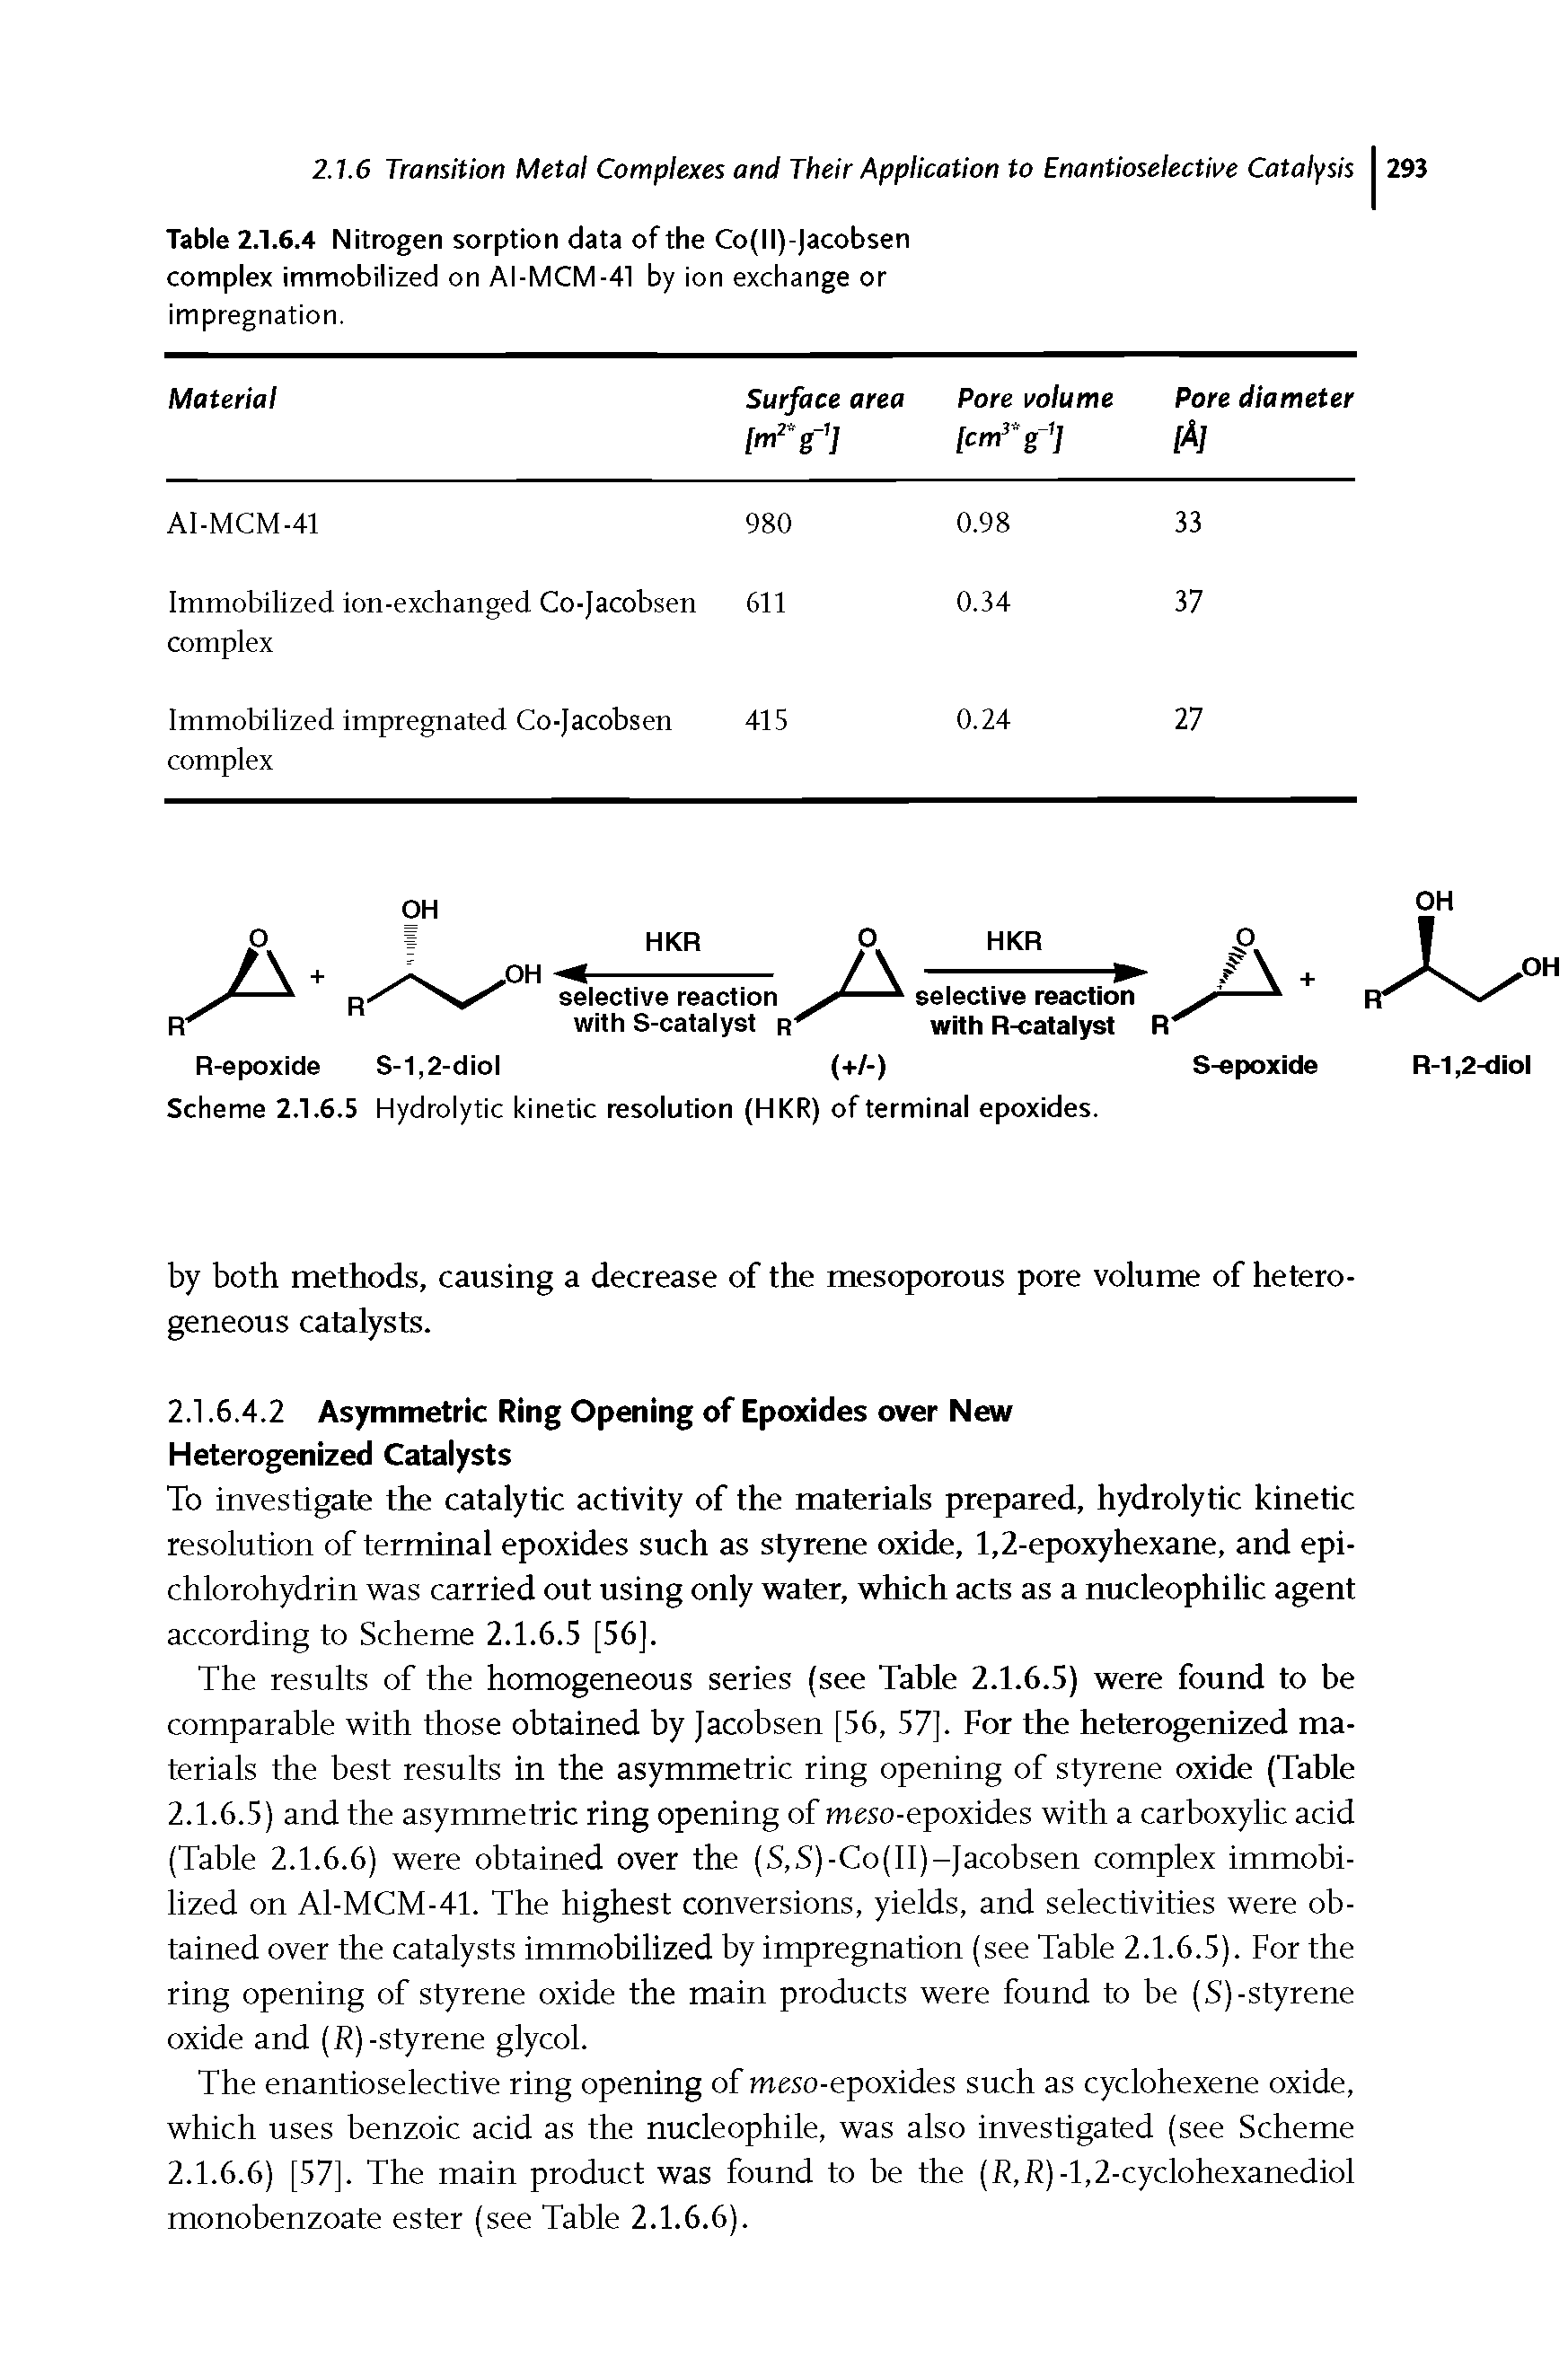 Scheme 2.1.6.5 Hydrolytic kinetic resolution (HKR) of terminal epoxides.